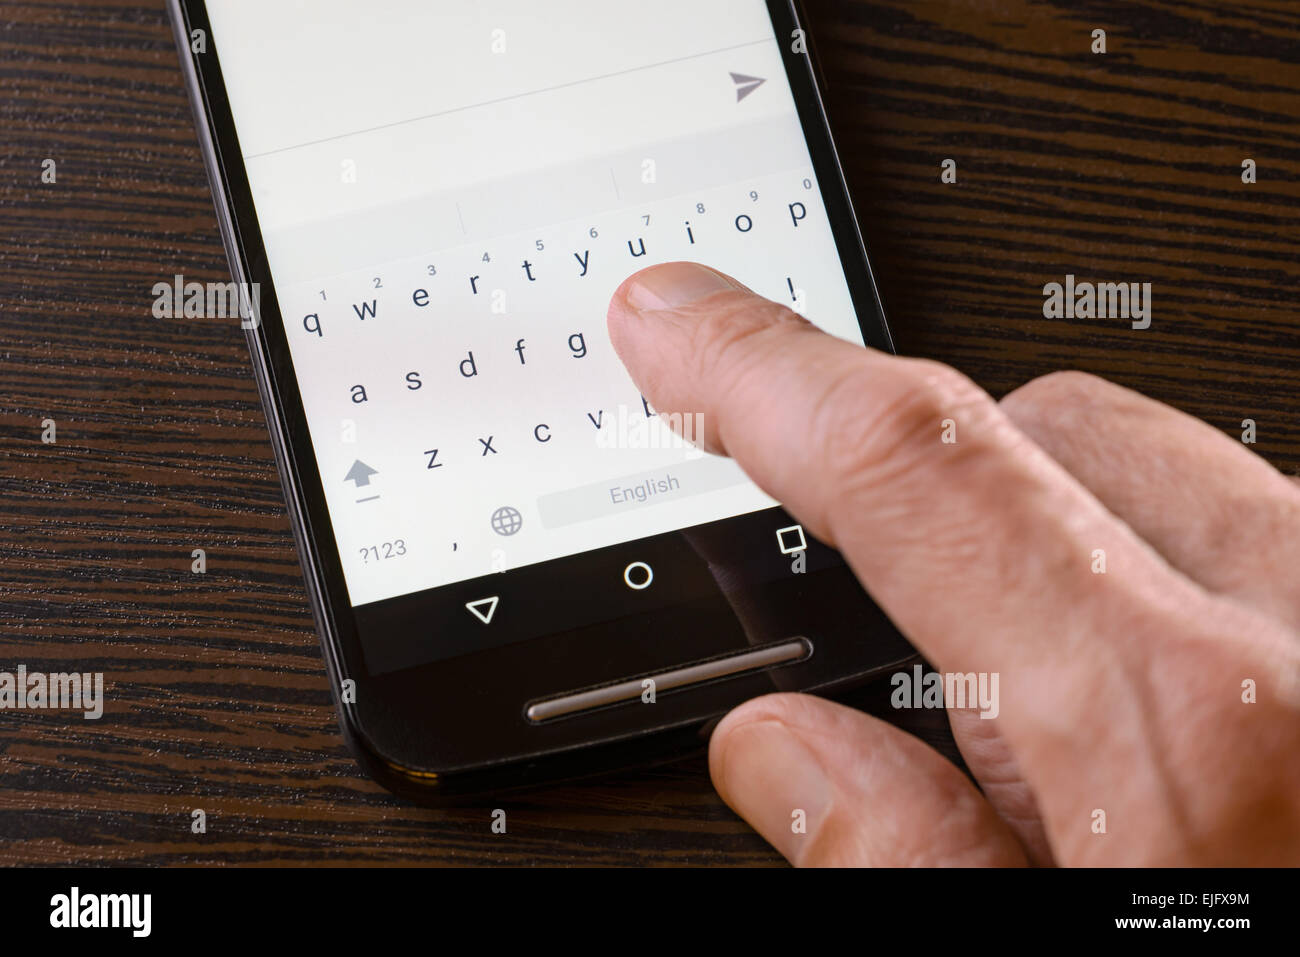 A man is typing an sms on the keypad of his black smartphone Stock Photo